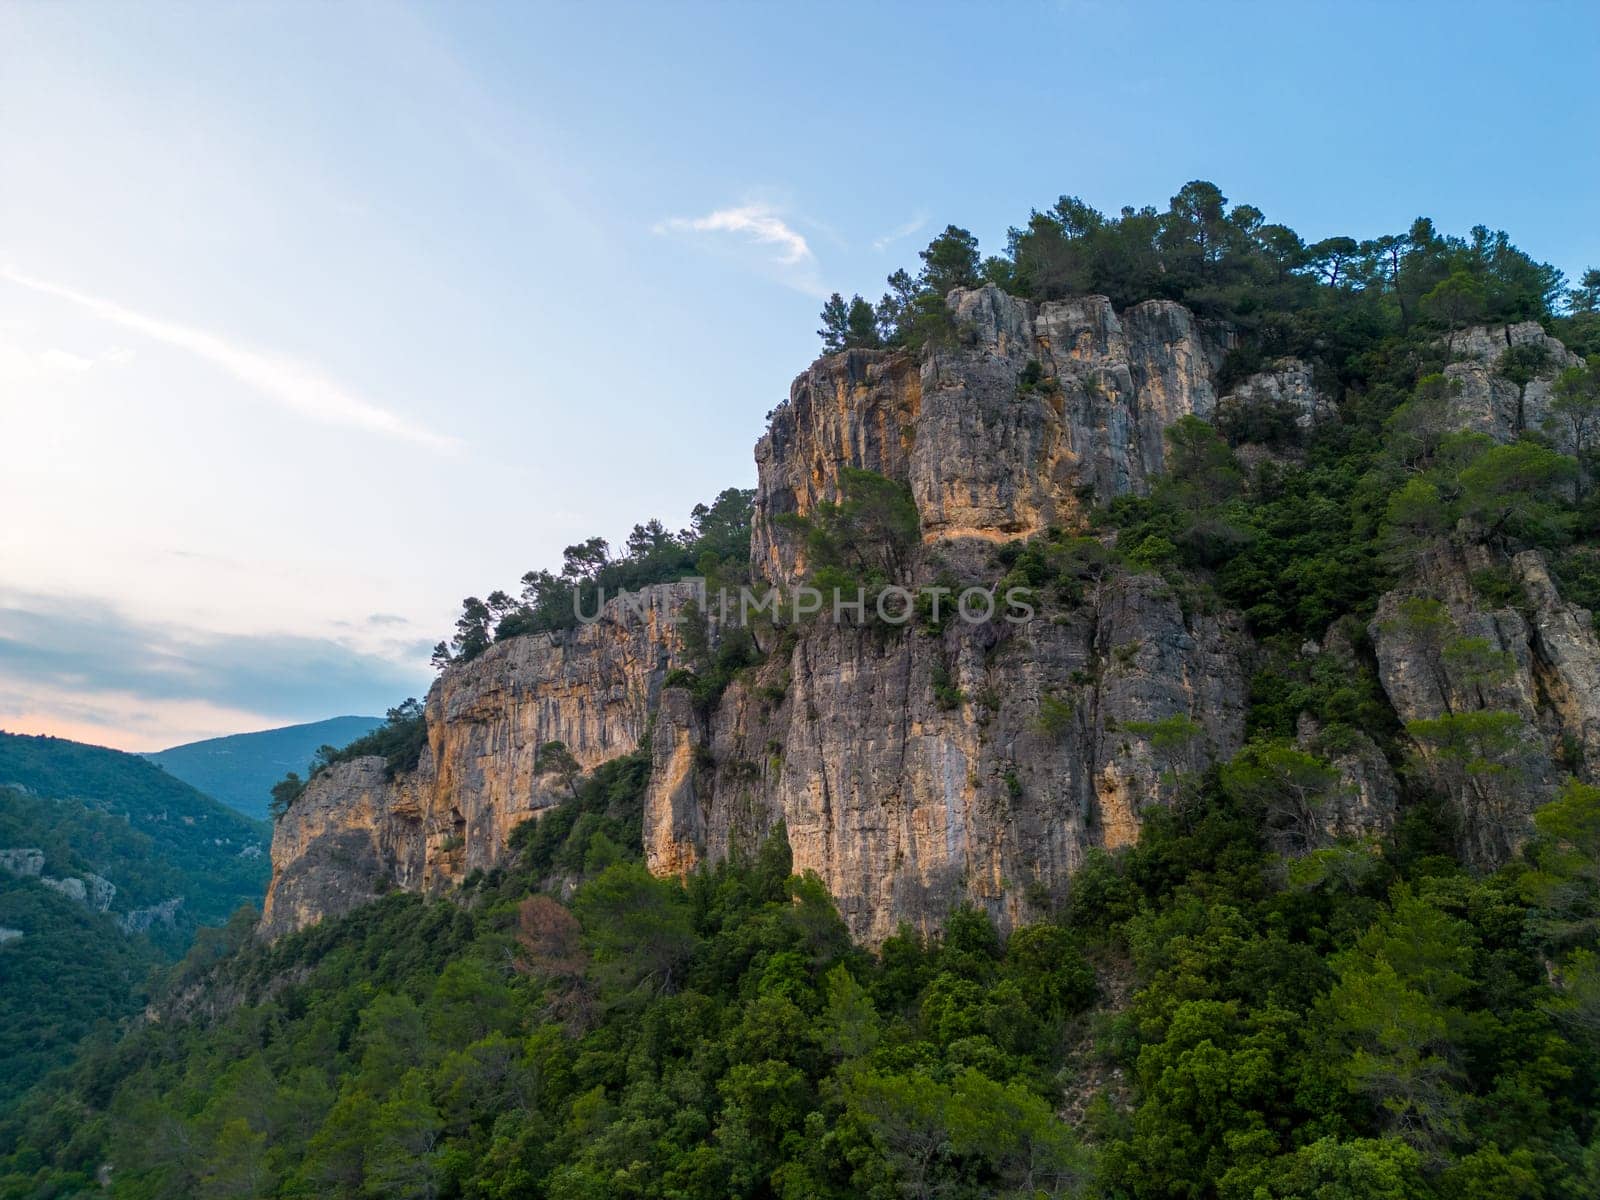 Steep rocky cliffs over forested landscape at golden hour by Osaze